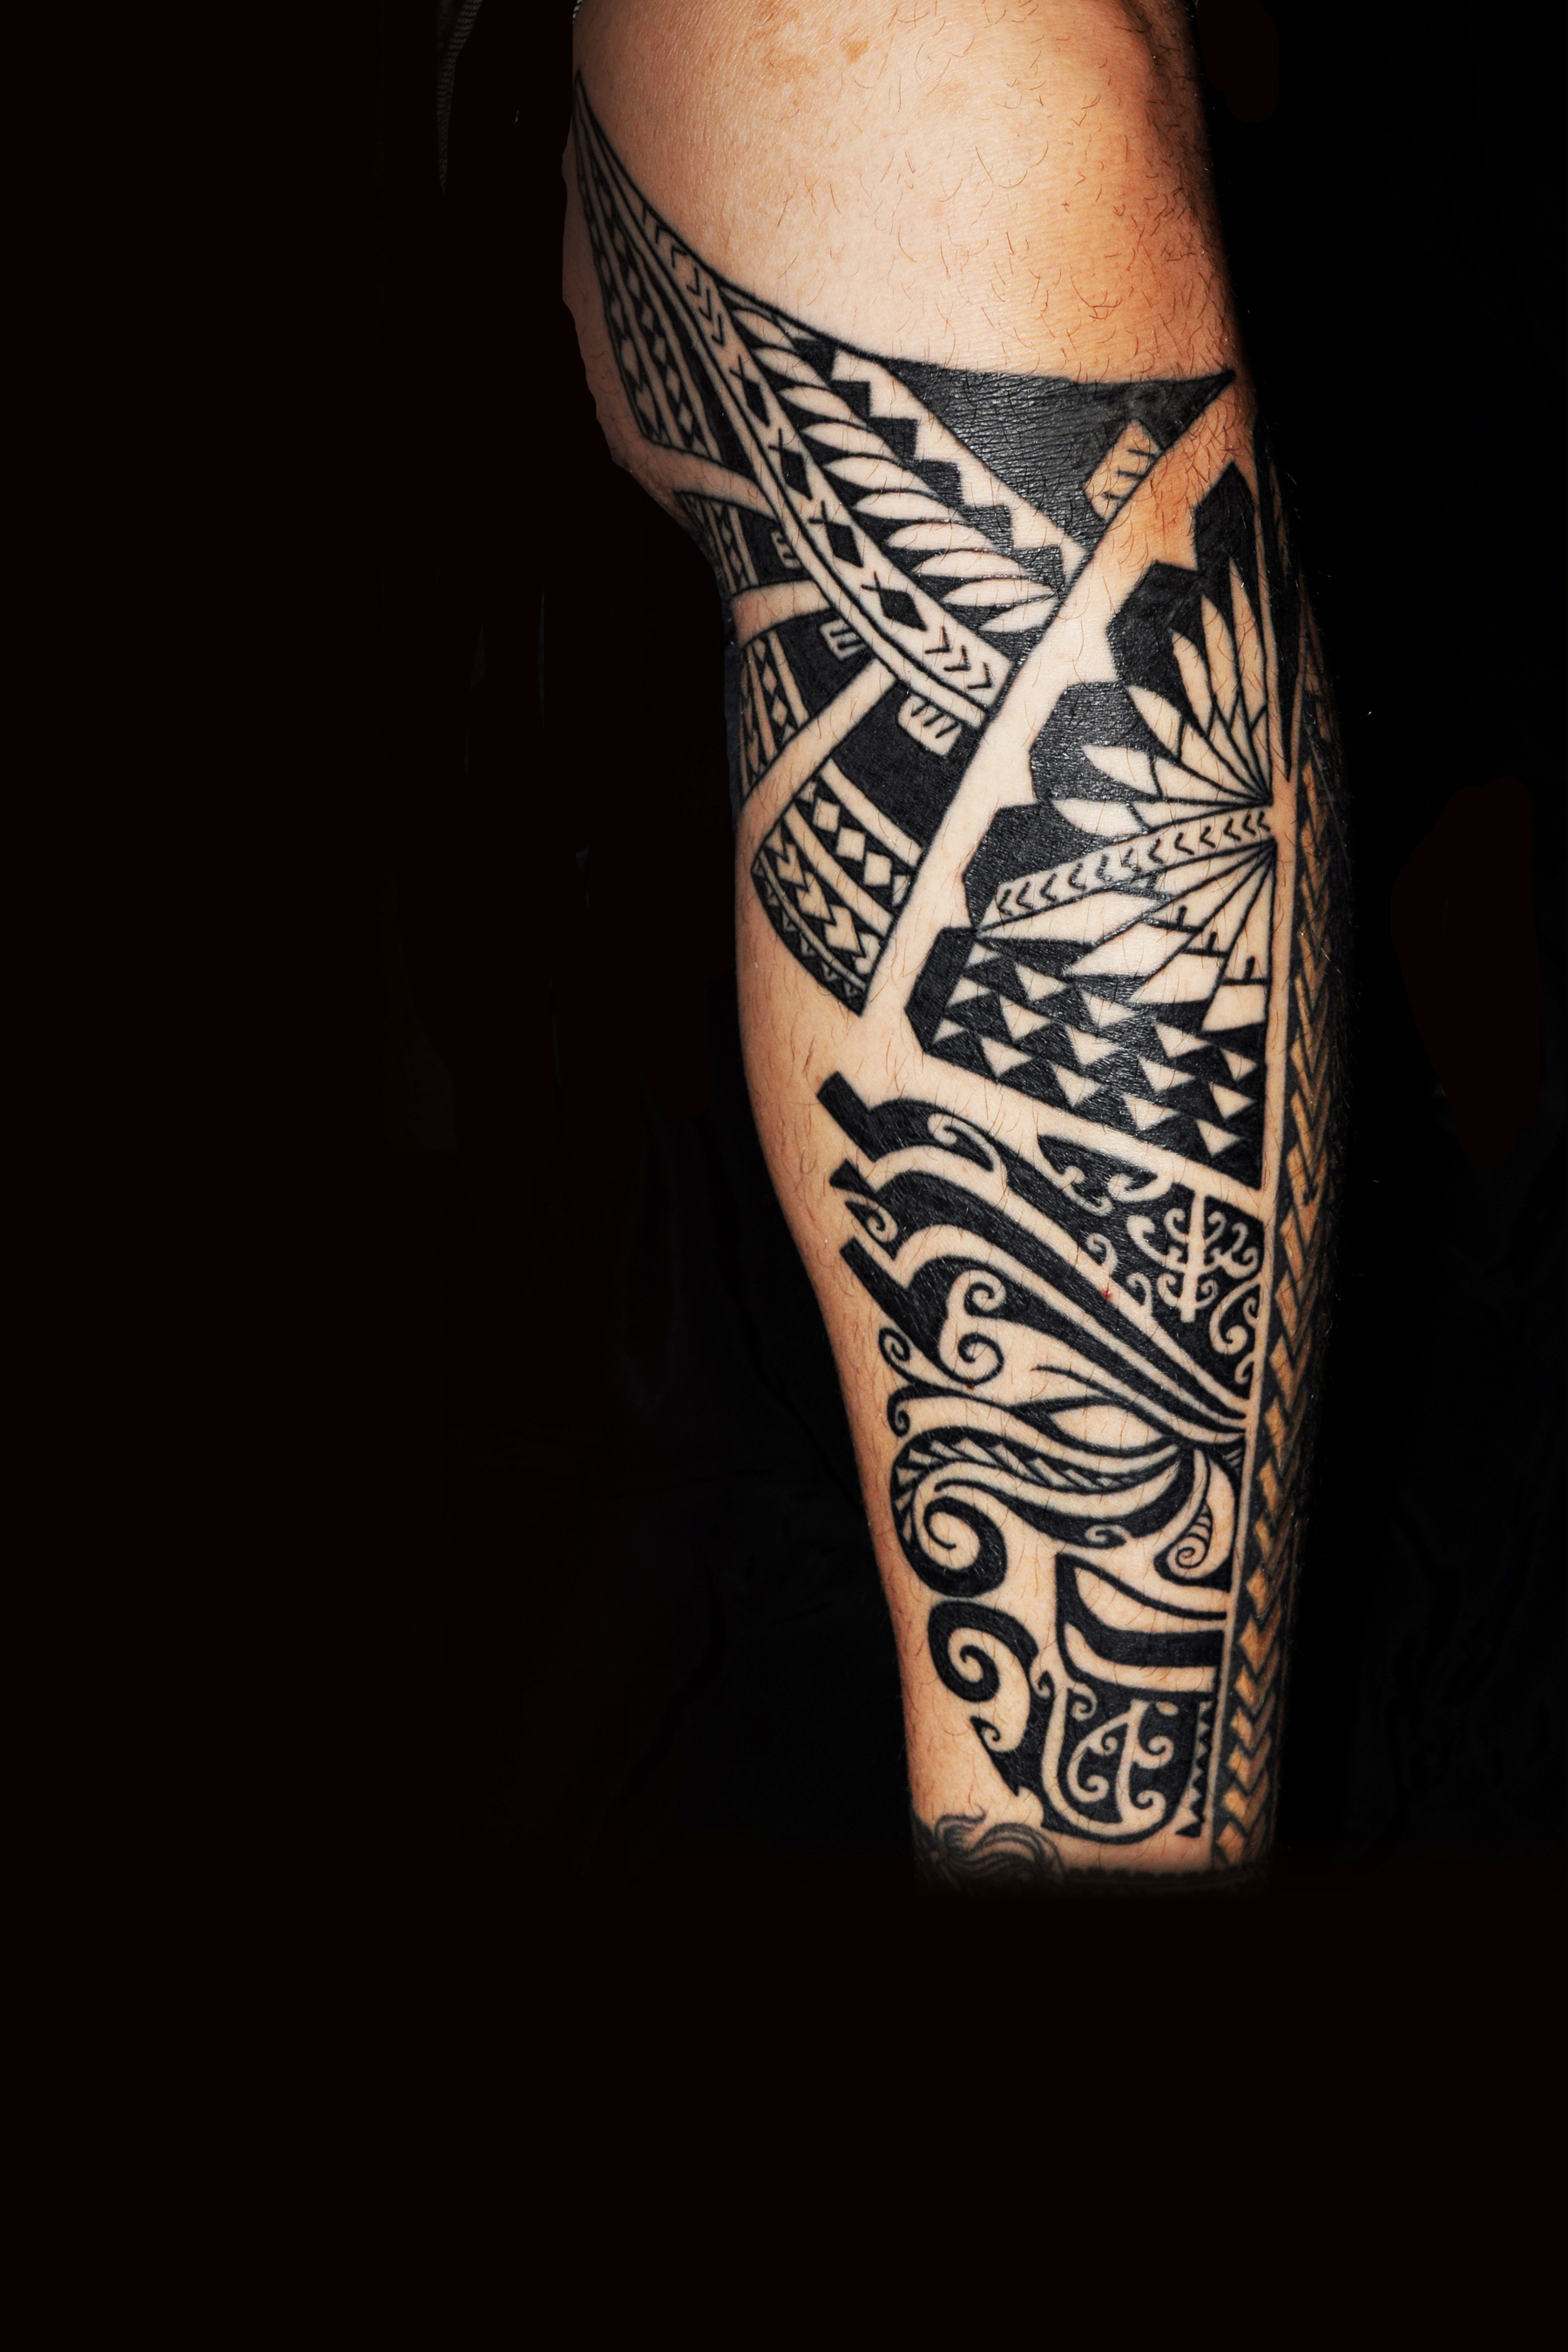 30 Pictures of Samoan Tattoos  Art and Design